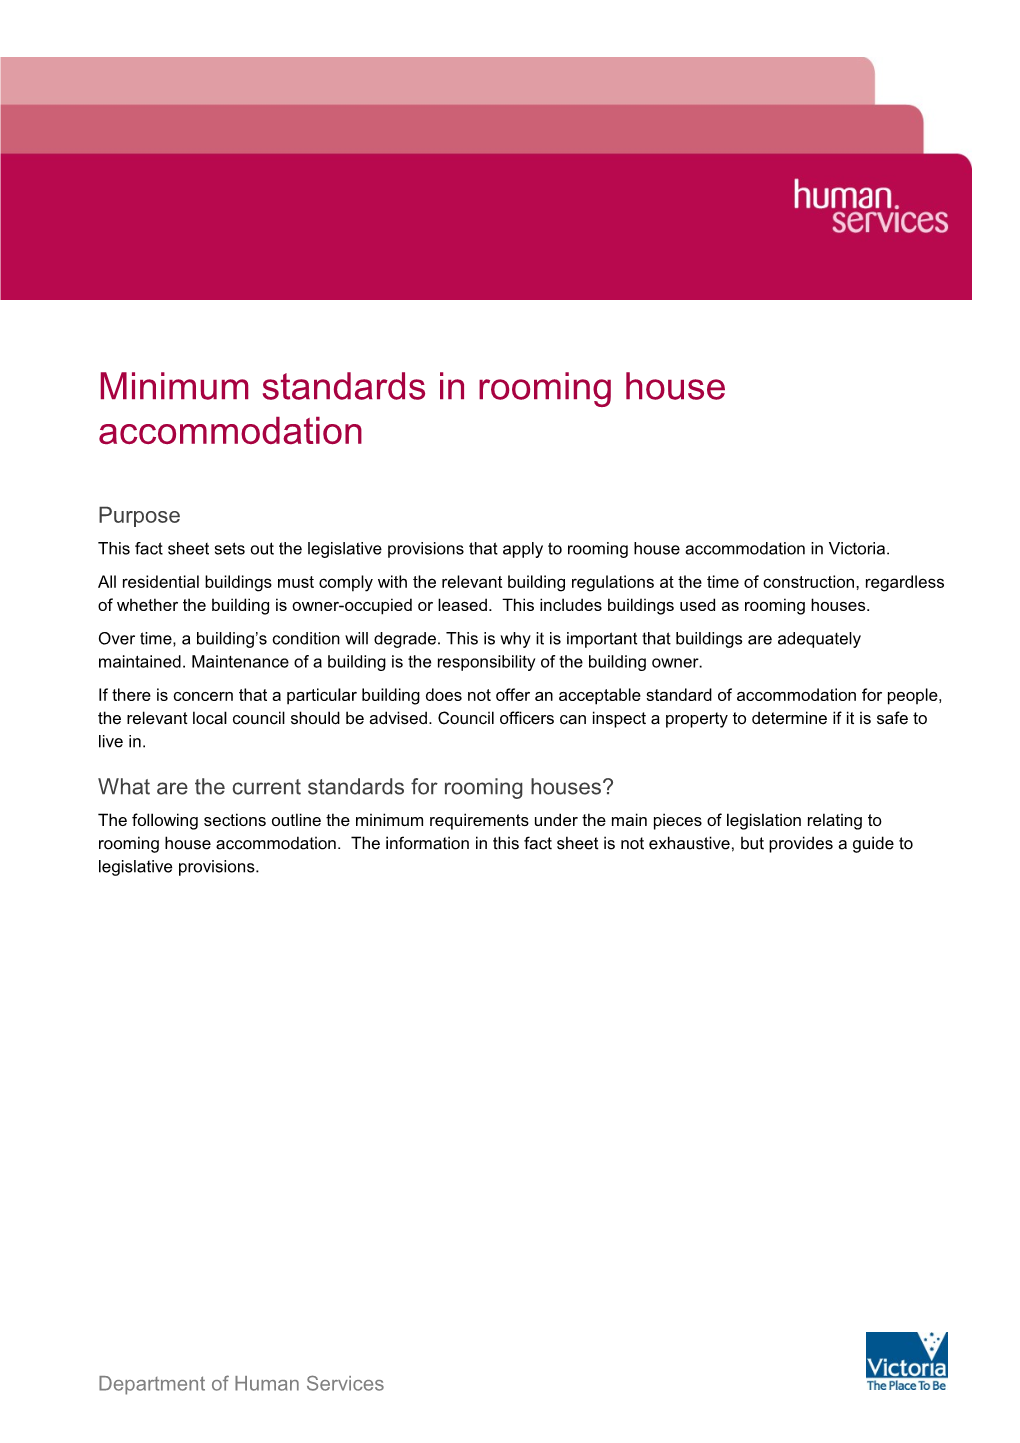 Minimum Standards in Rooming House Accomodation